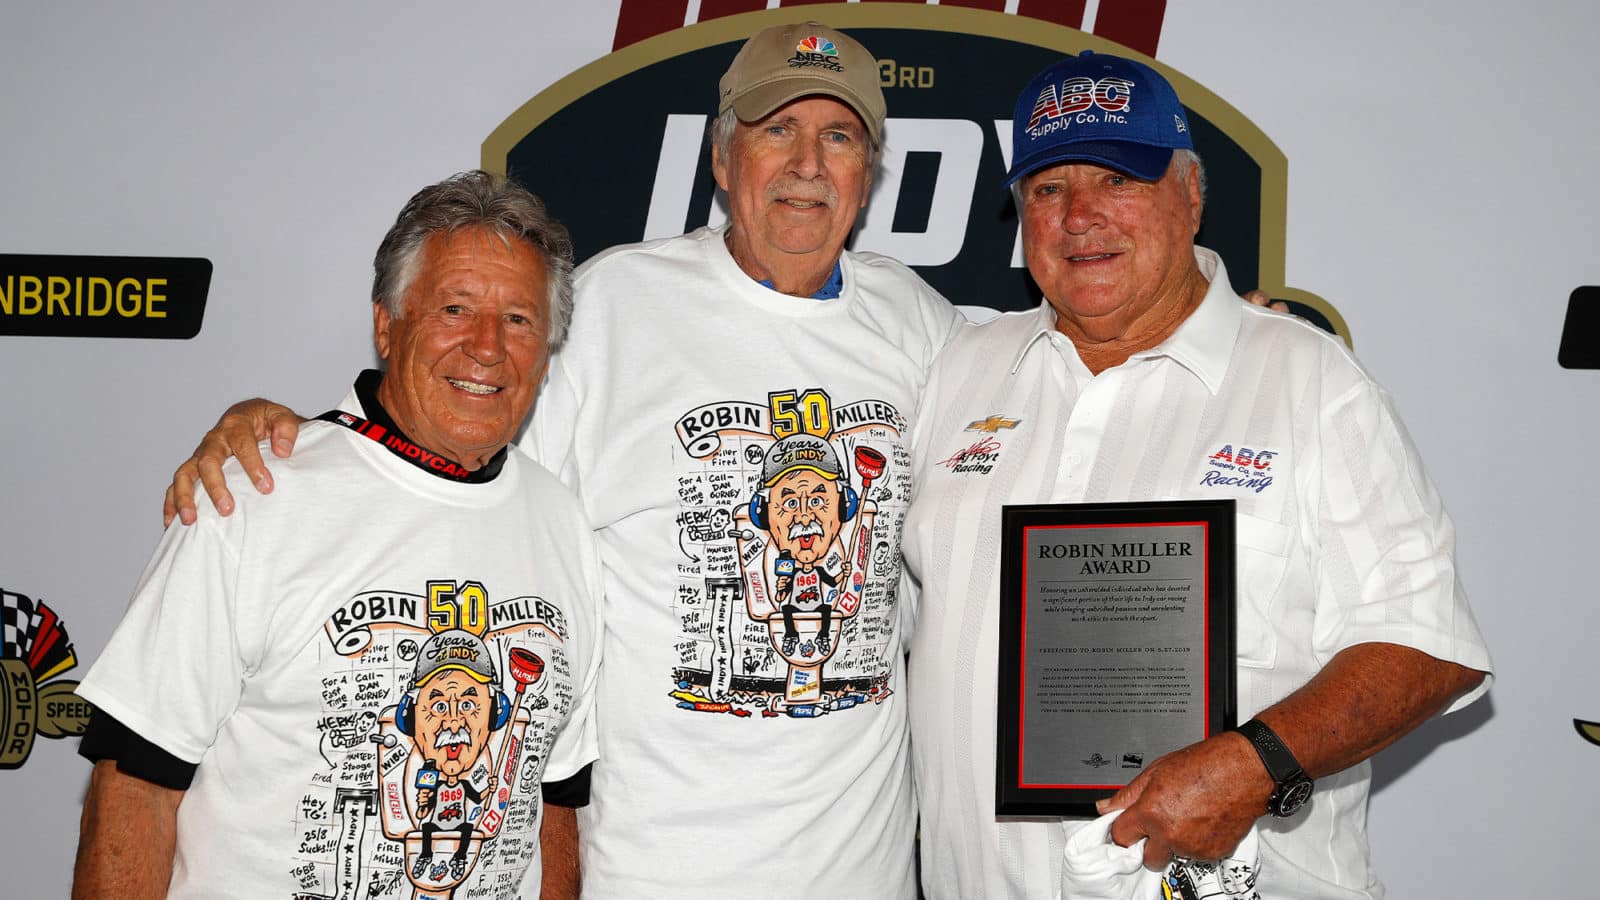 Robin Miller with Mario Andretti and AJ Foyt